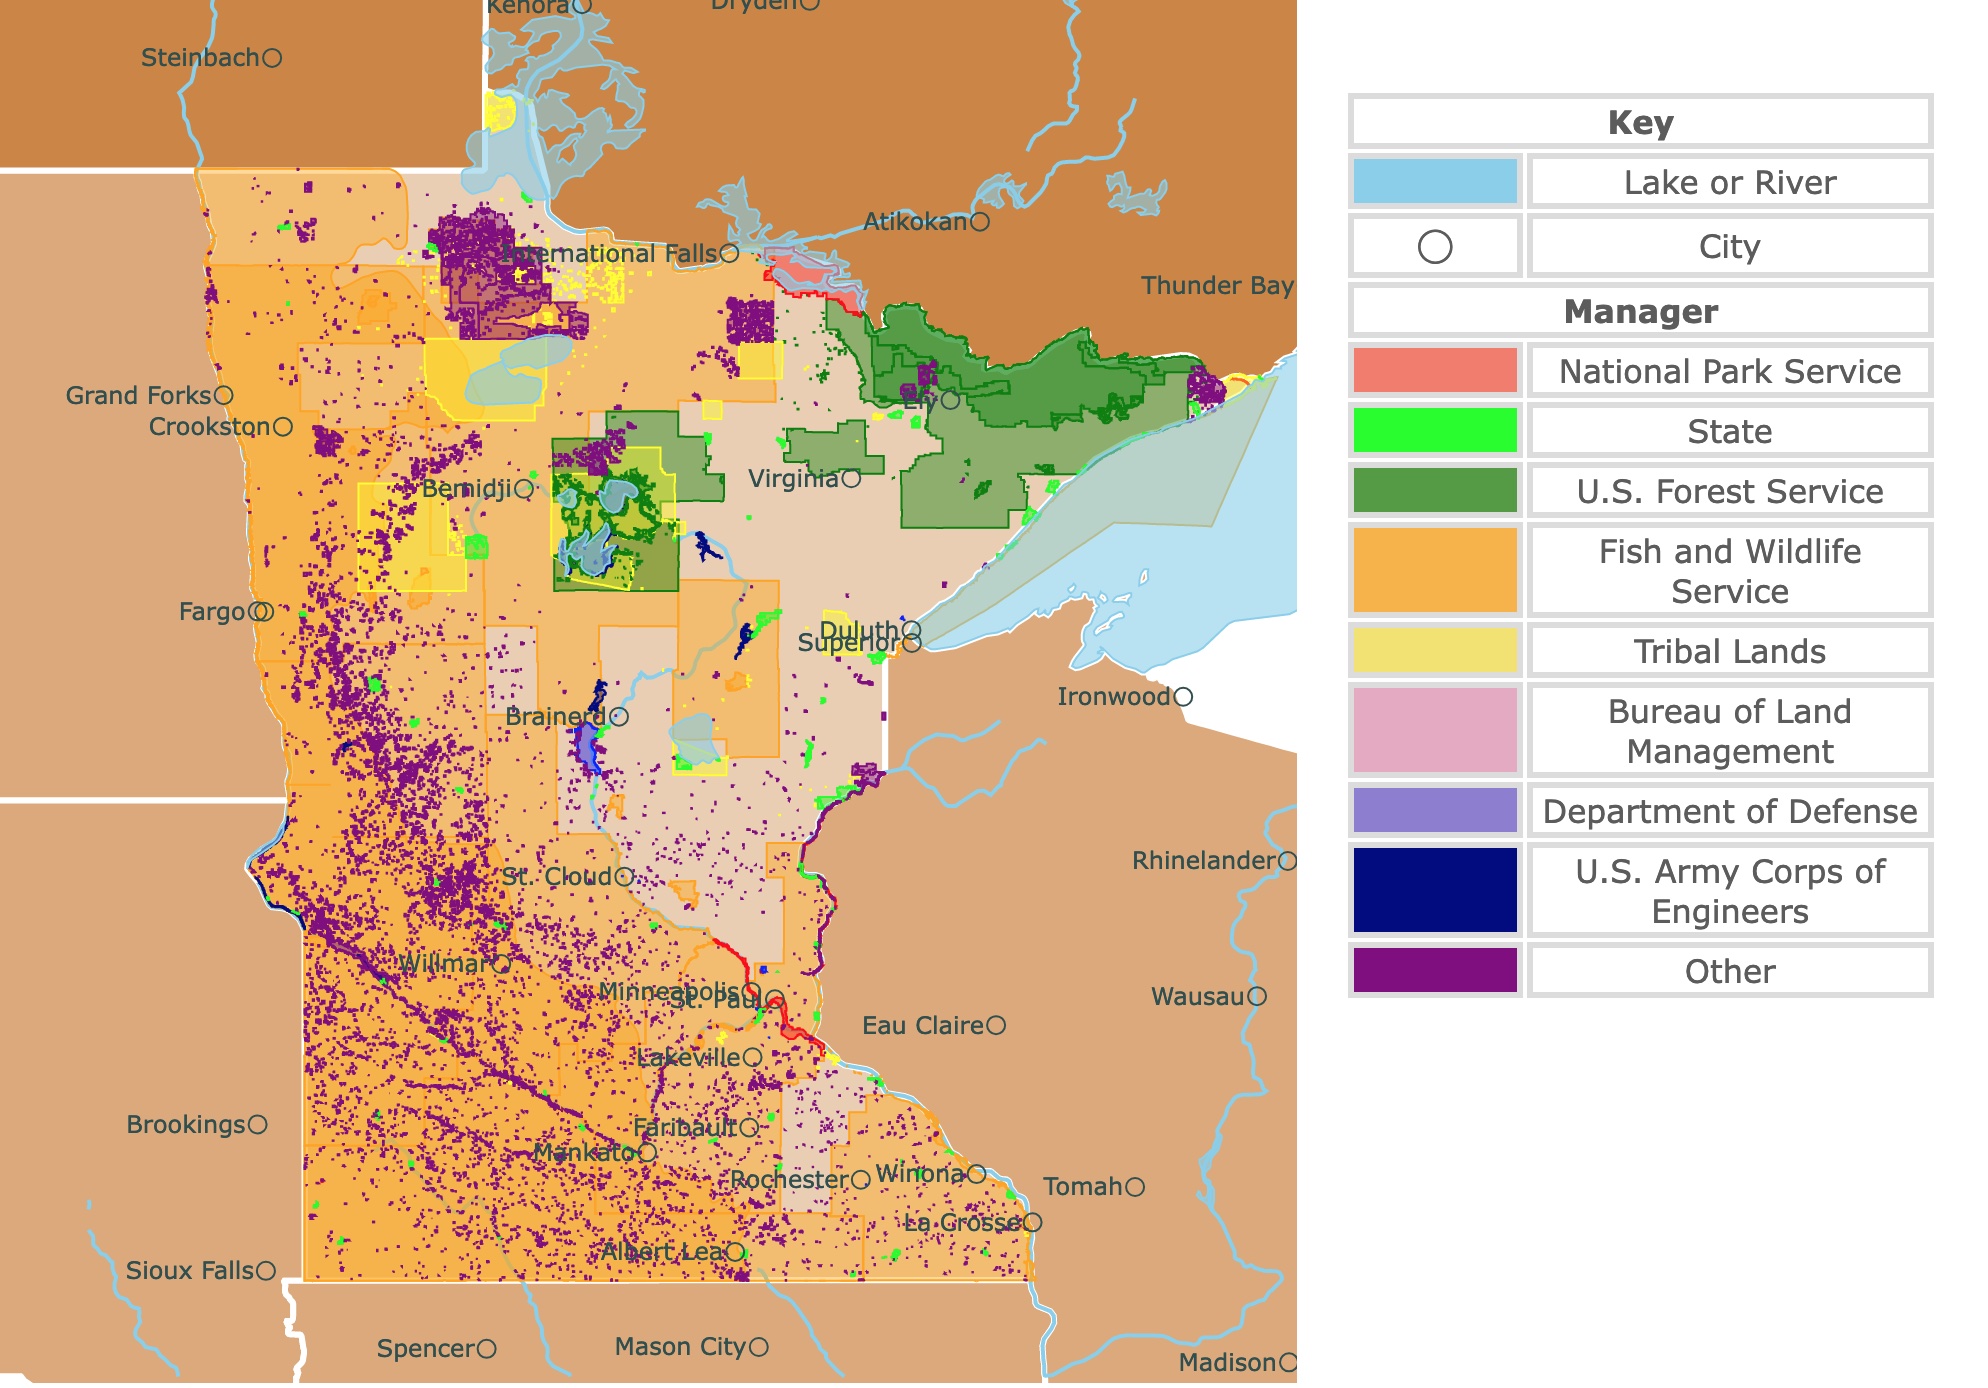 Map of Minnesota's state parks, national parks, forests, and public lands areas